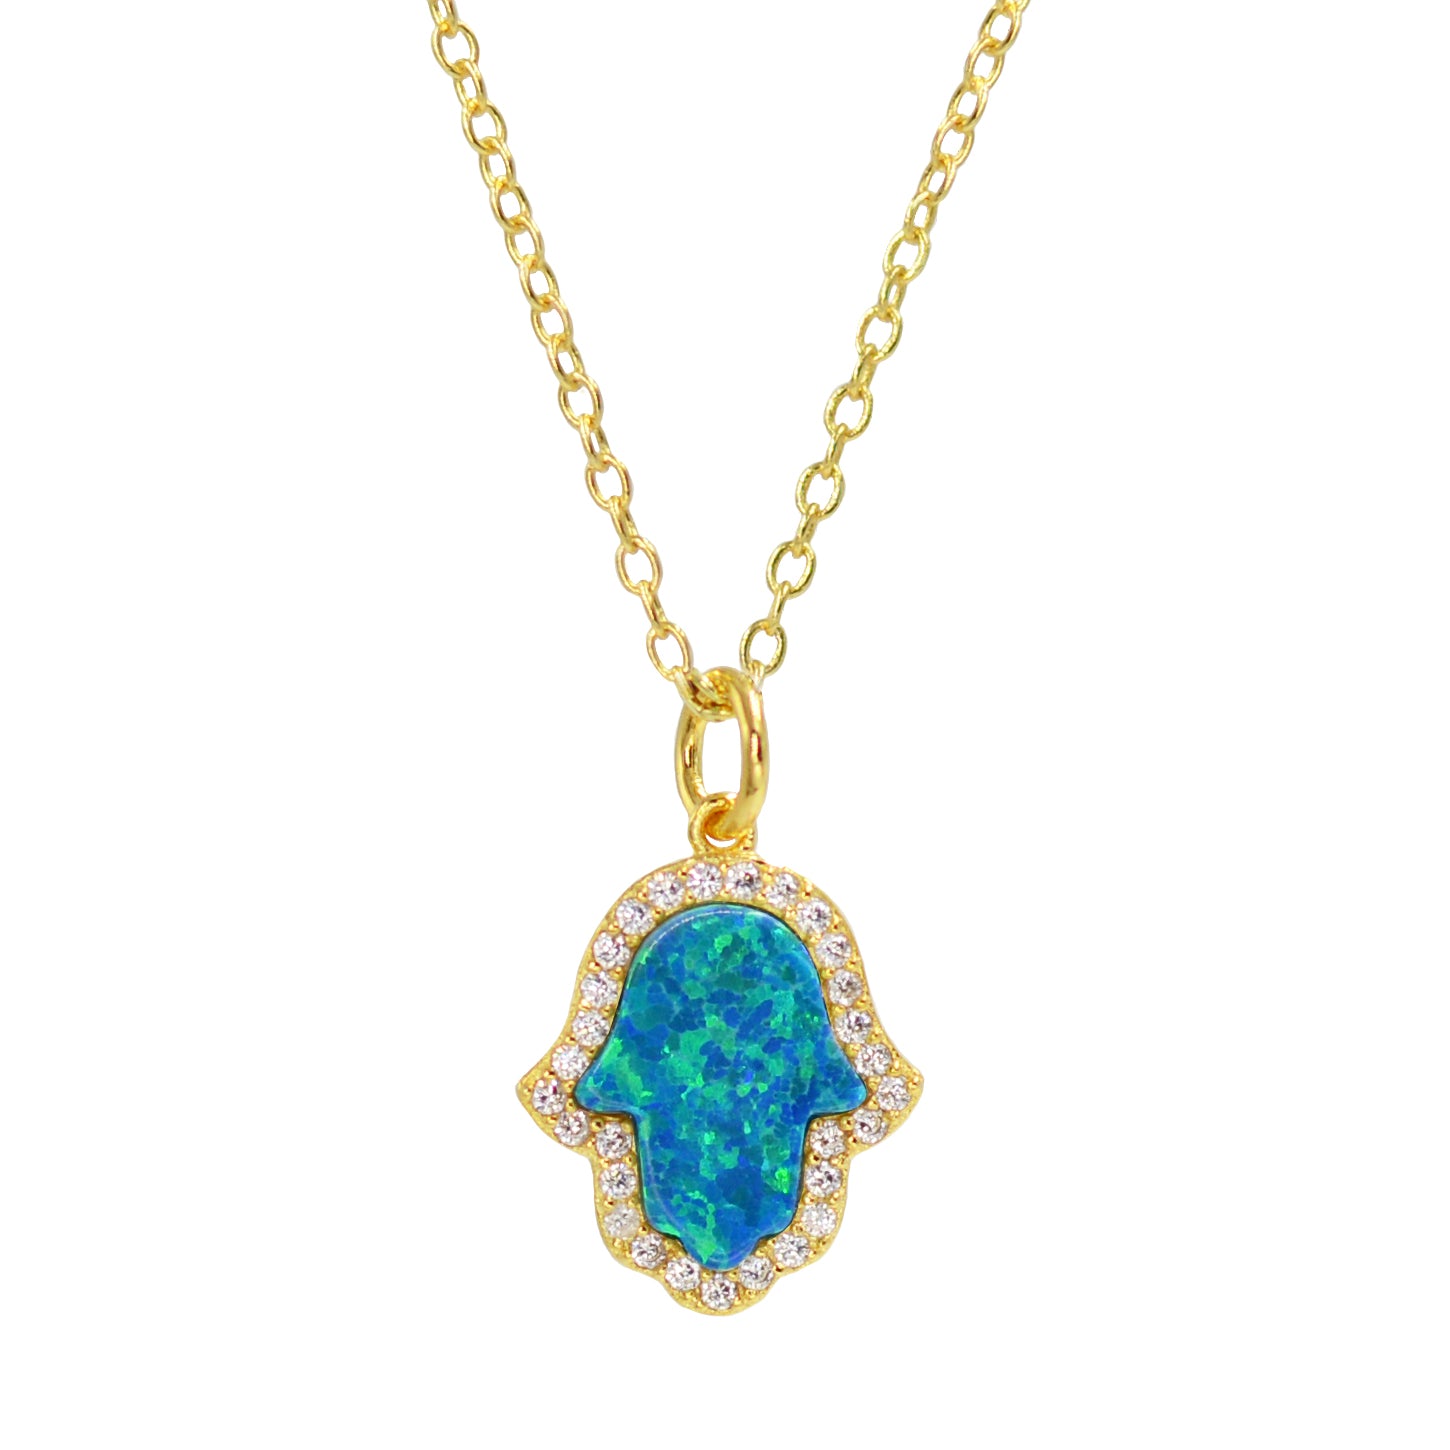 Hamsa Hand White Opal Necklace in Gold